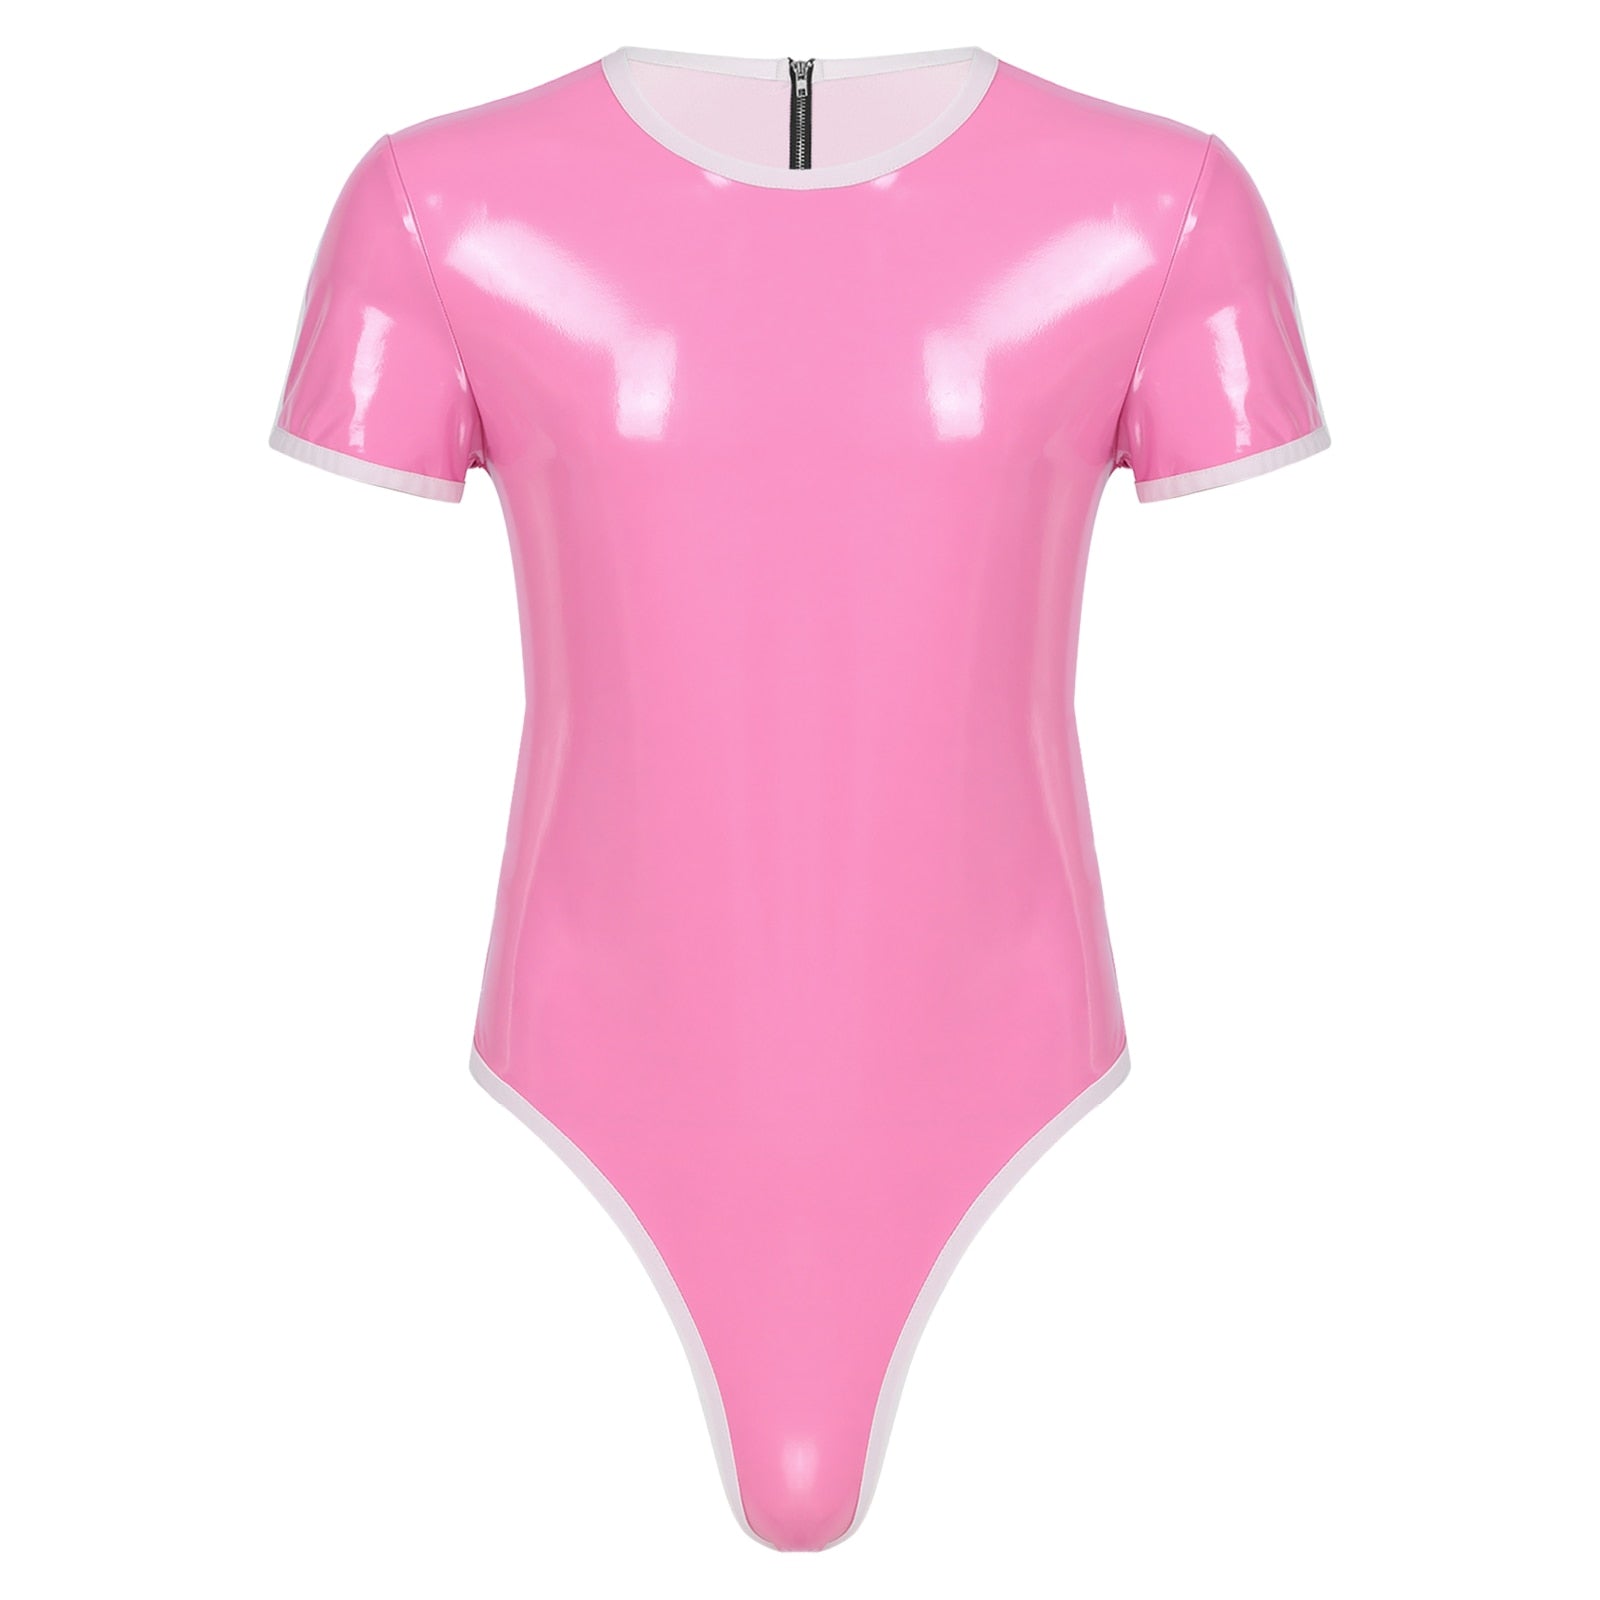 Pink Patent Leather Bodysuit: Sexy Male Sissy Lingerie – My